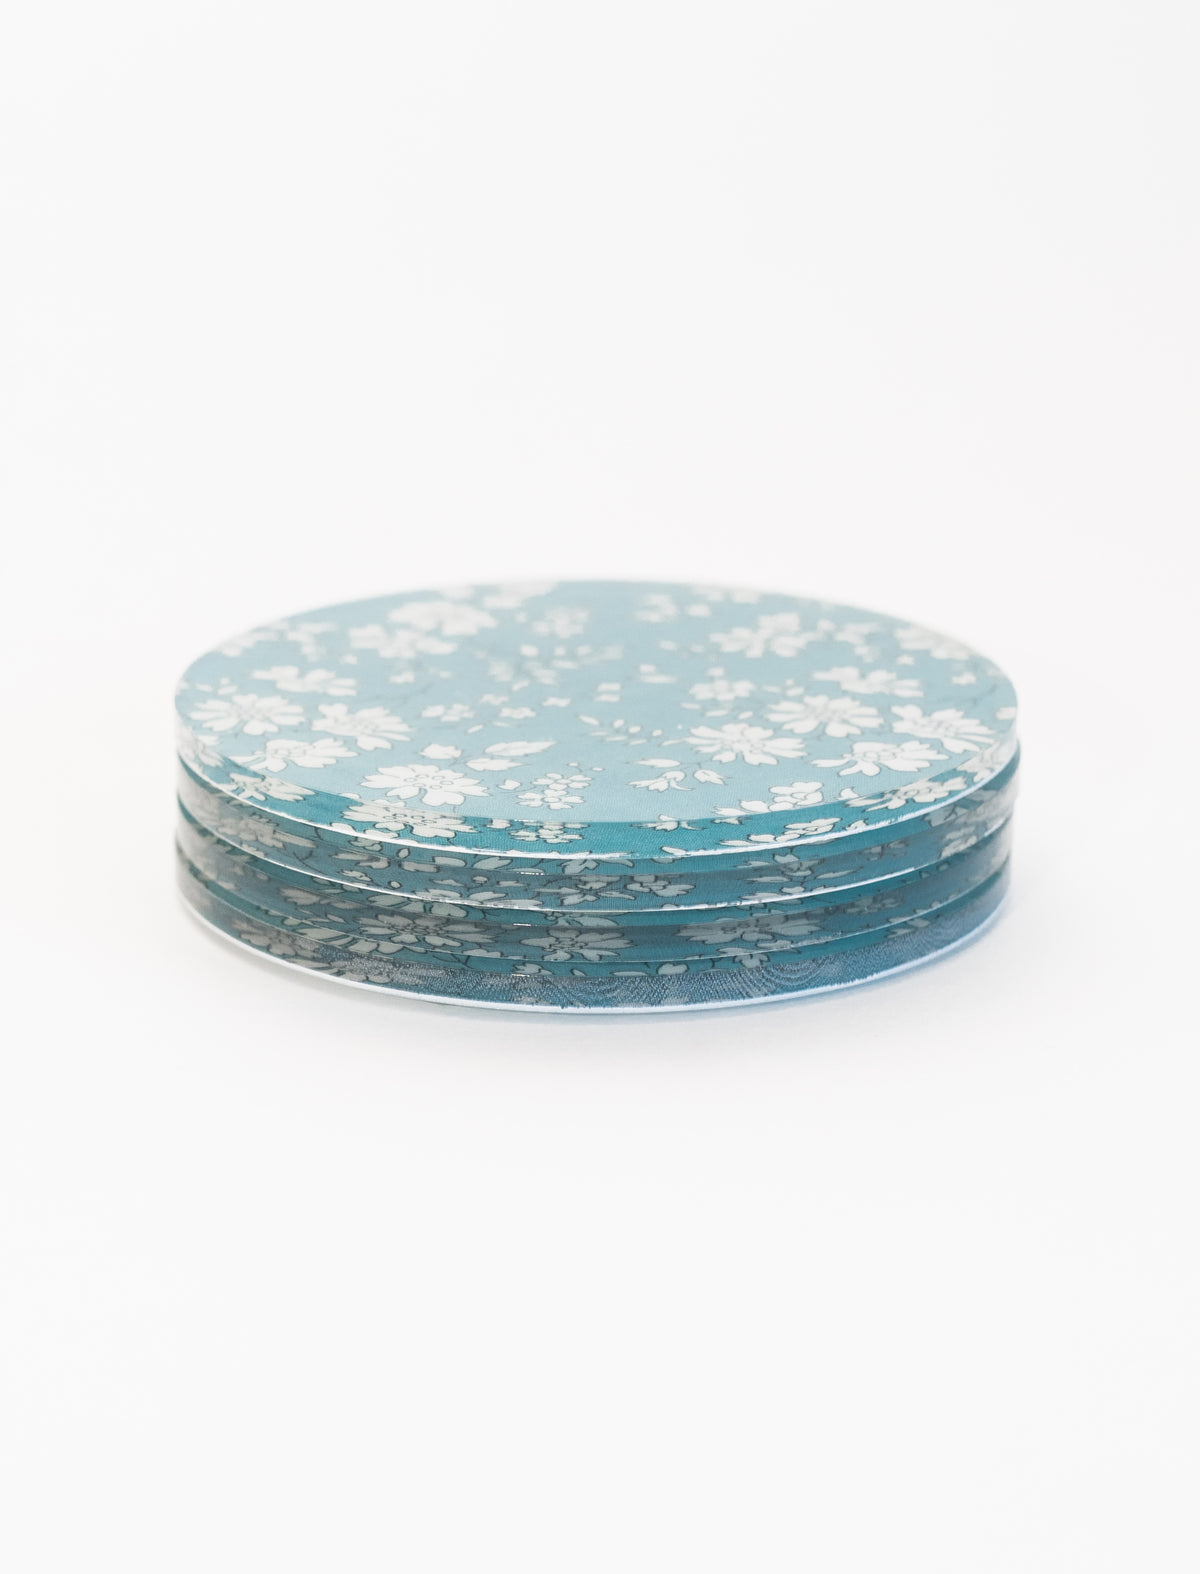 Starbuck Turquoise Floral Coaster Set